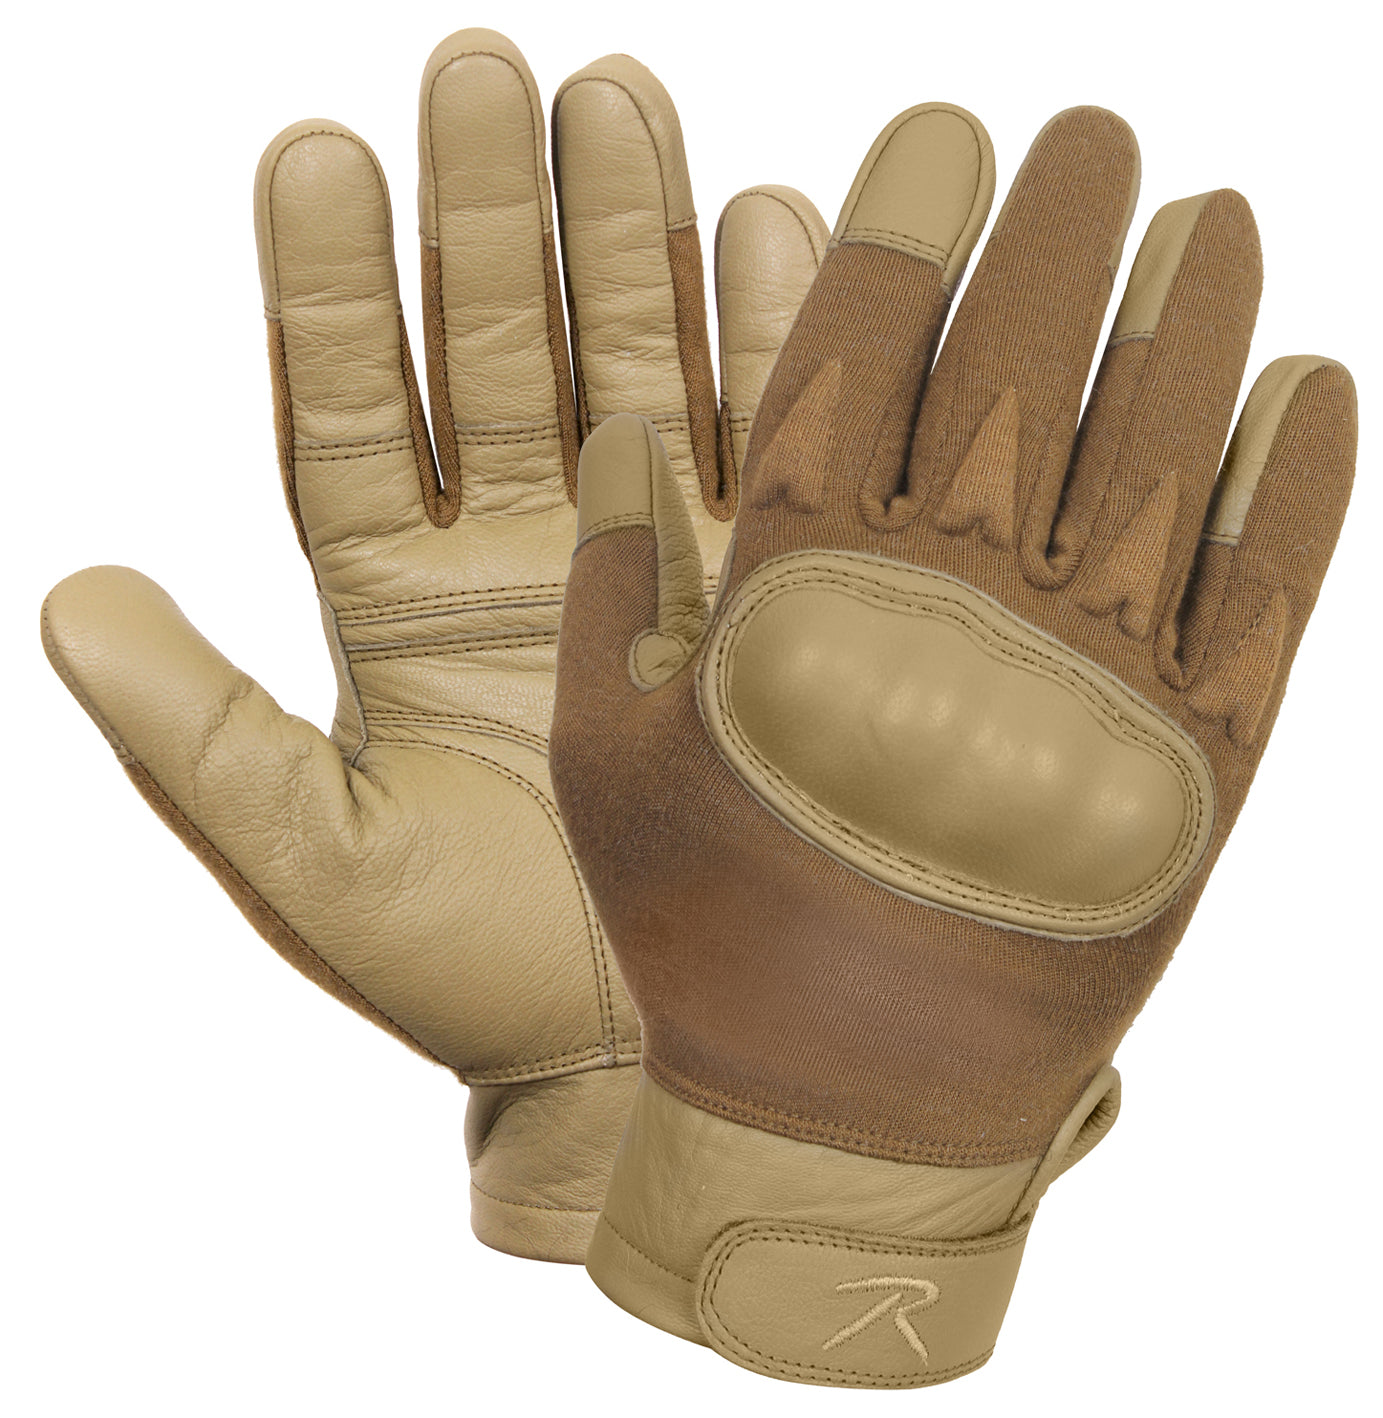 Rothco Hard Knuckle Cut and Fire Resistant Gloves - Tactical Choice Plus